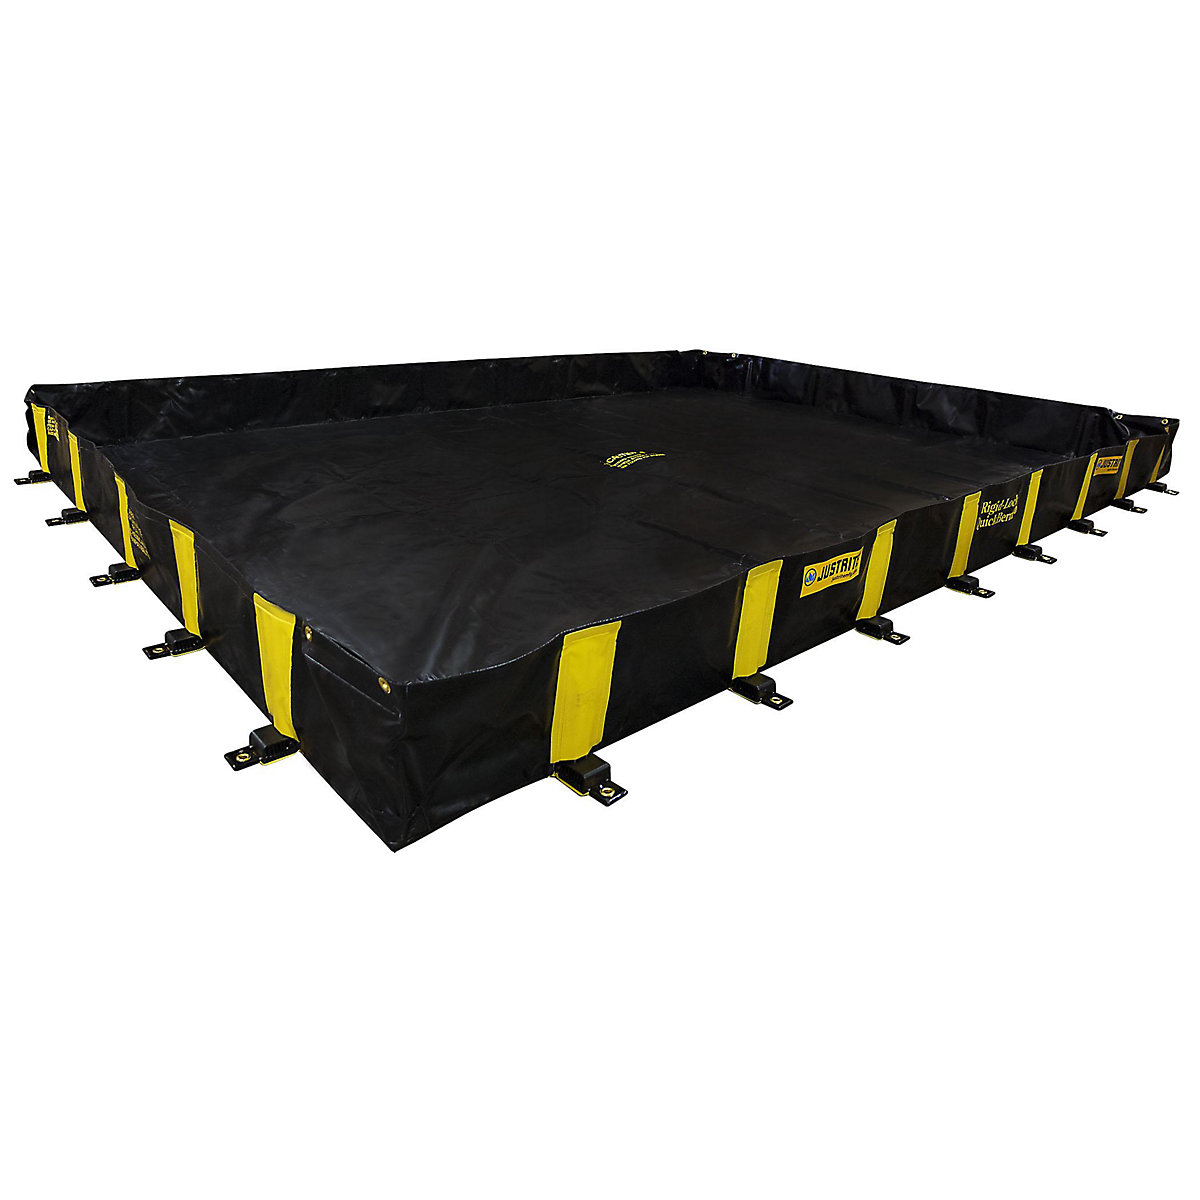 QuickBerm® XT rigid lock folding tray – Justrite, for frequent traffic, LxW 4.6 x 3 m-10